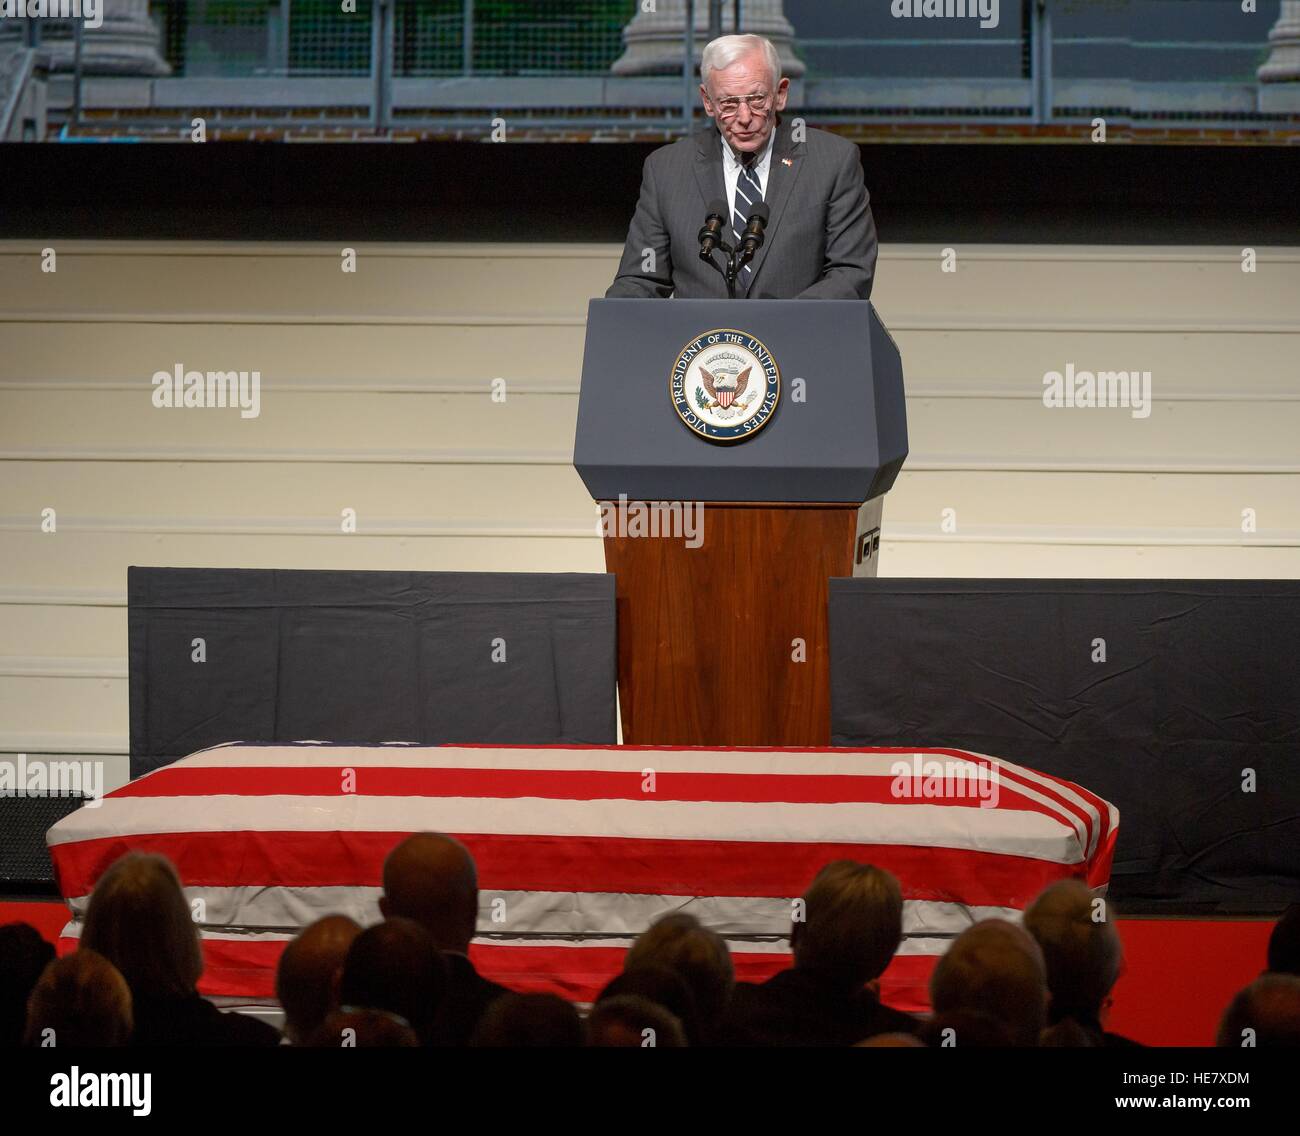 Director of the Smithsonian National Air and Space Museum Gen. Jack Dailey speaks during a service celebrating the life of former astronaut and U.S. Senator John Glenn during memorial service at Ohio State University December 17, 2016 in Columbus, Ohio. The former Marine pilot, Senator and first man to orbit the earth died last week at the age of 95. Stock Photo